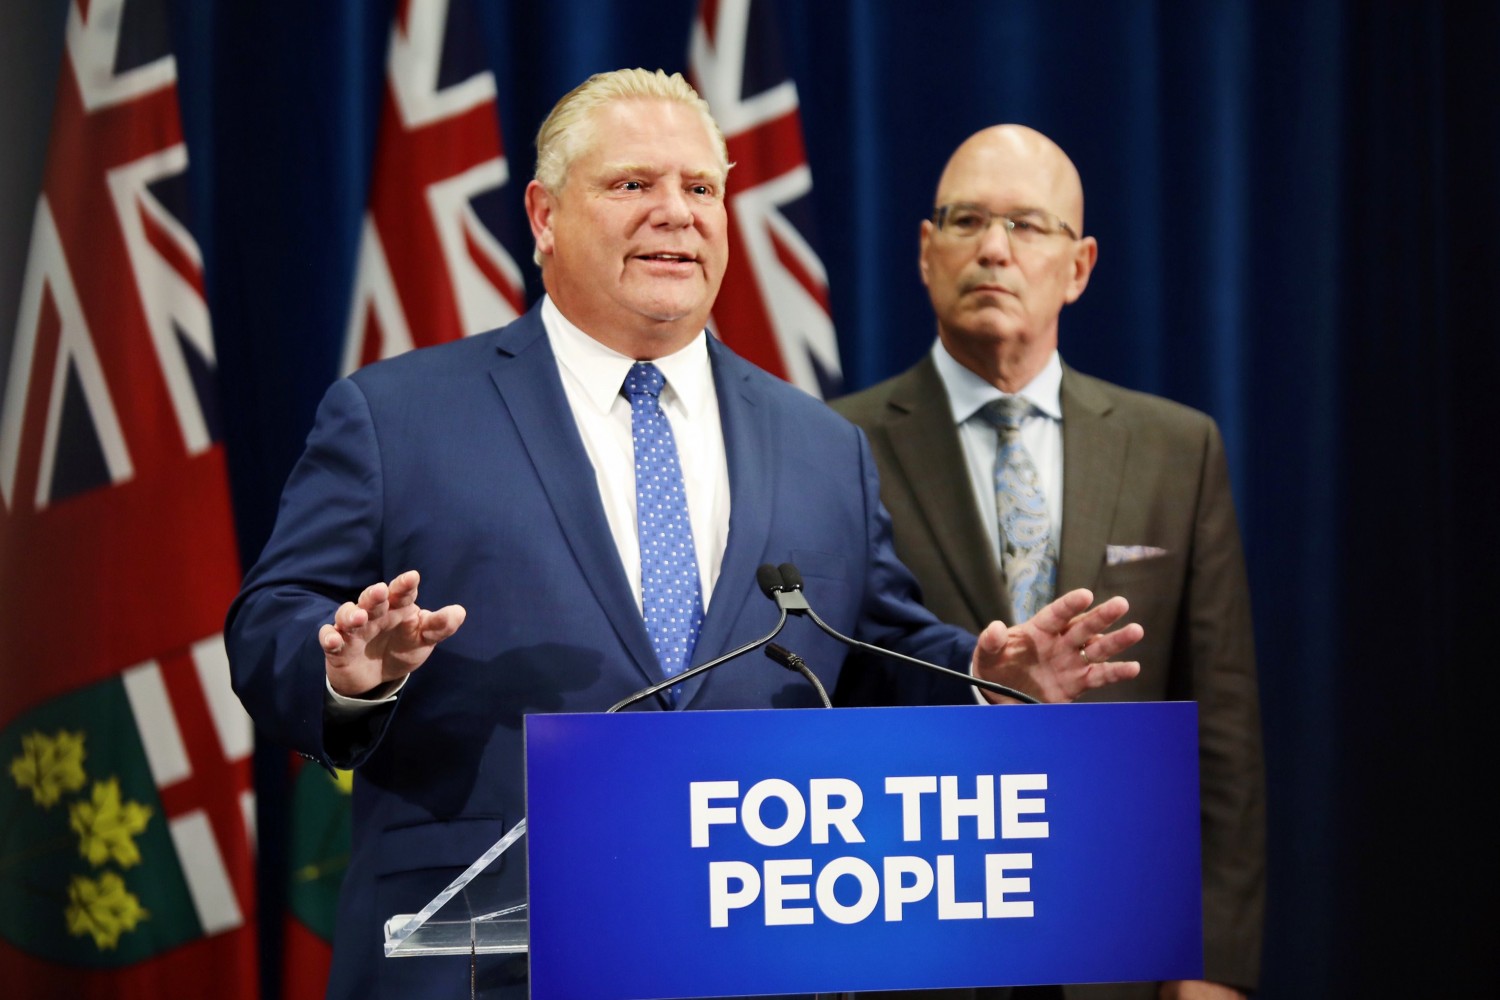 Ford’s about-face on municipal cuts restores millions in core service funding for Peel Region